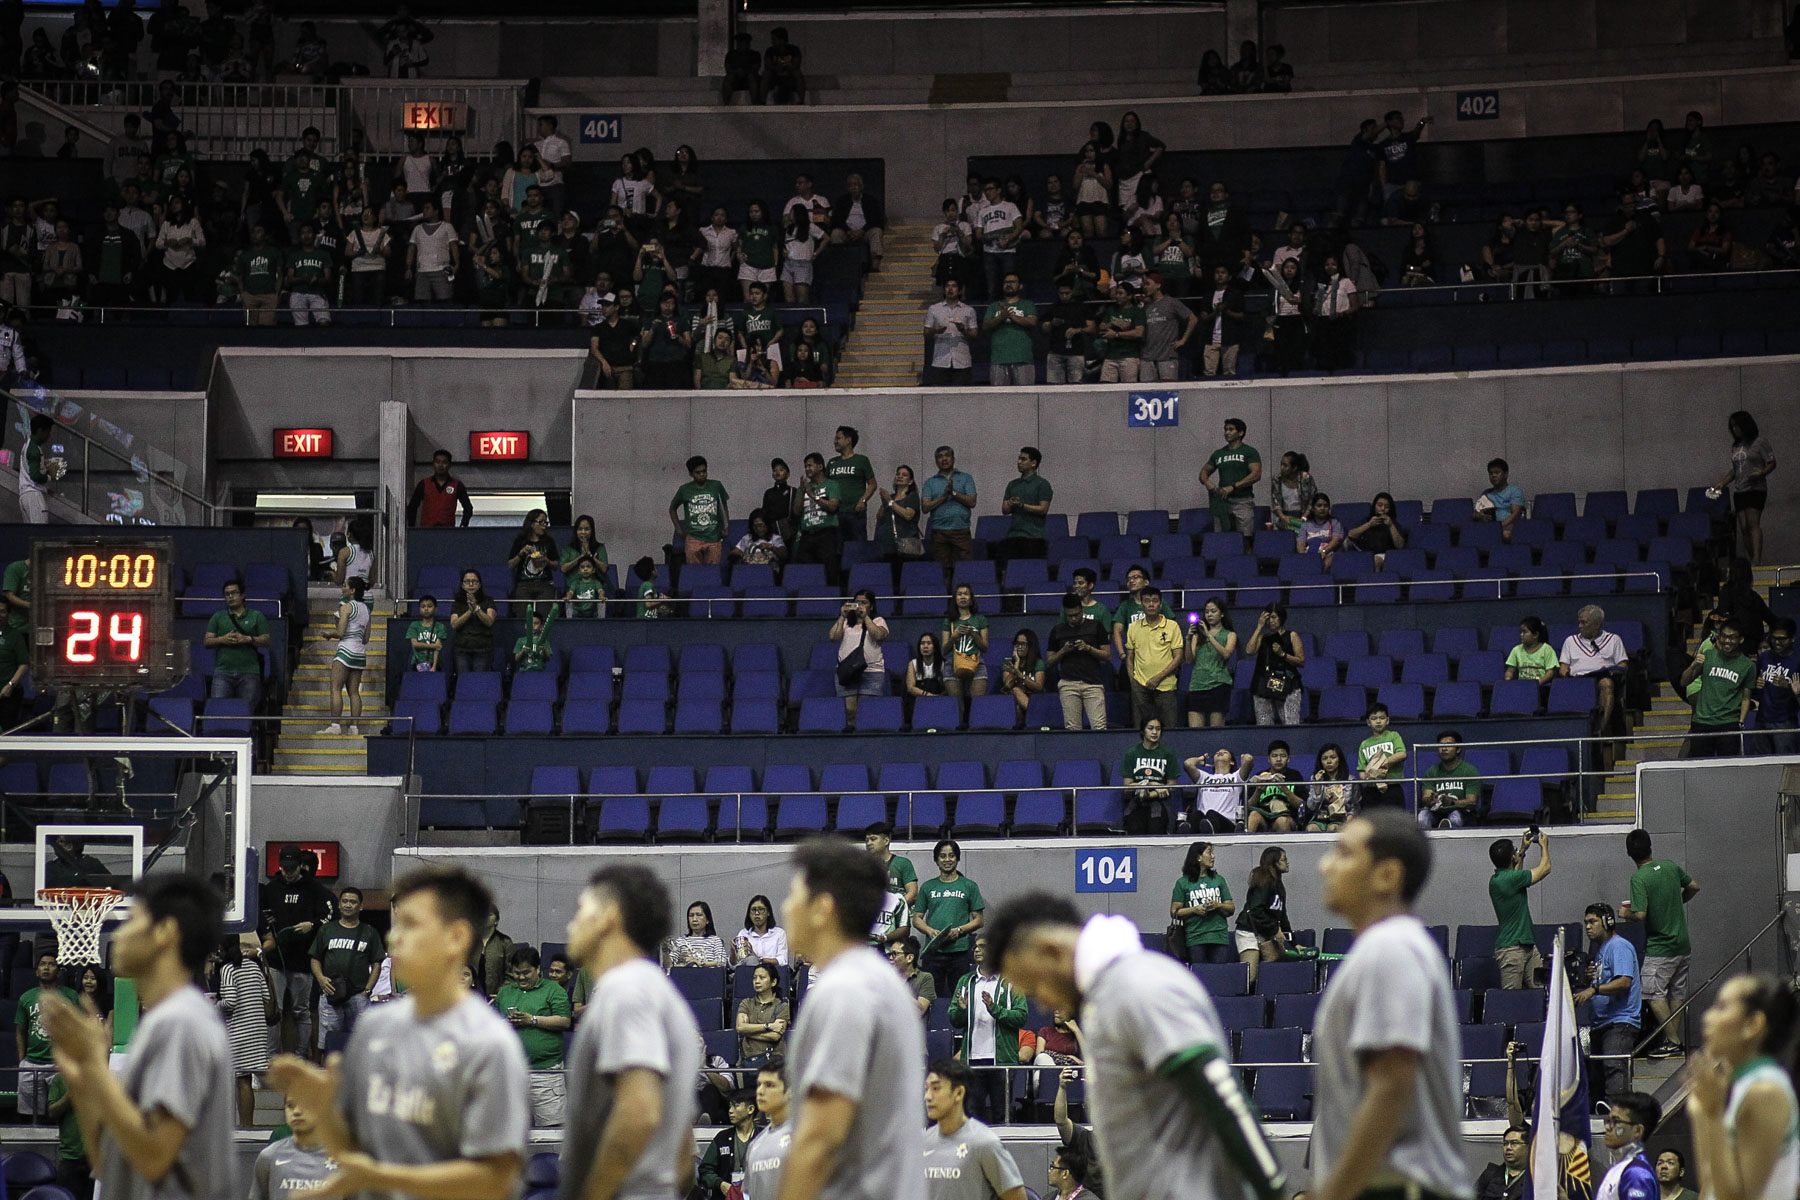 LOOK: Many empty seats for La Salle-Ateneo game